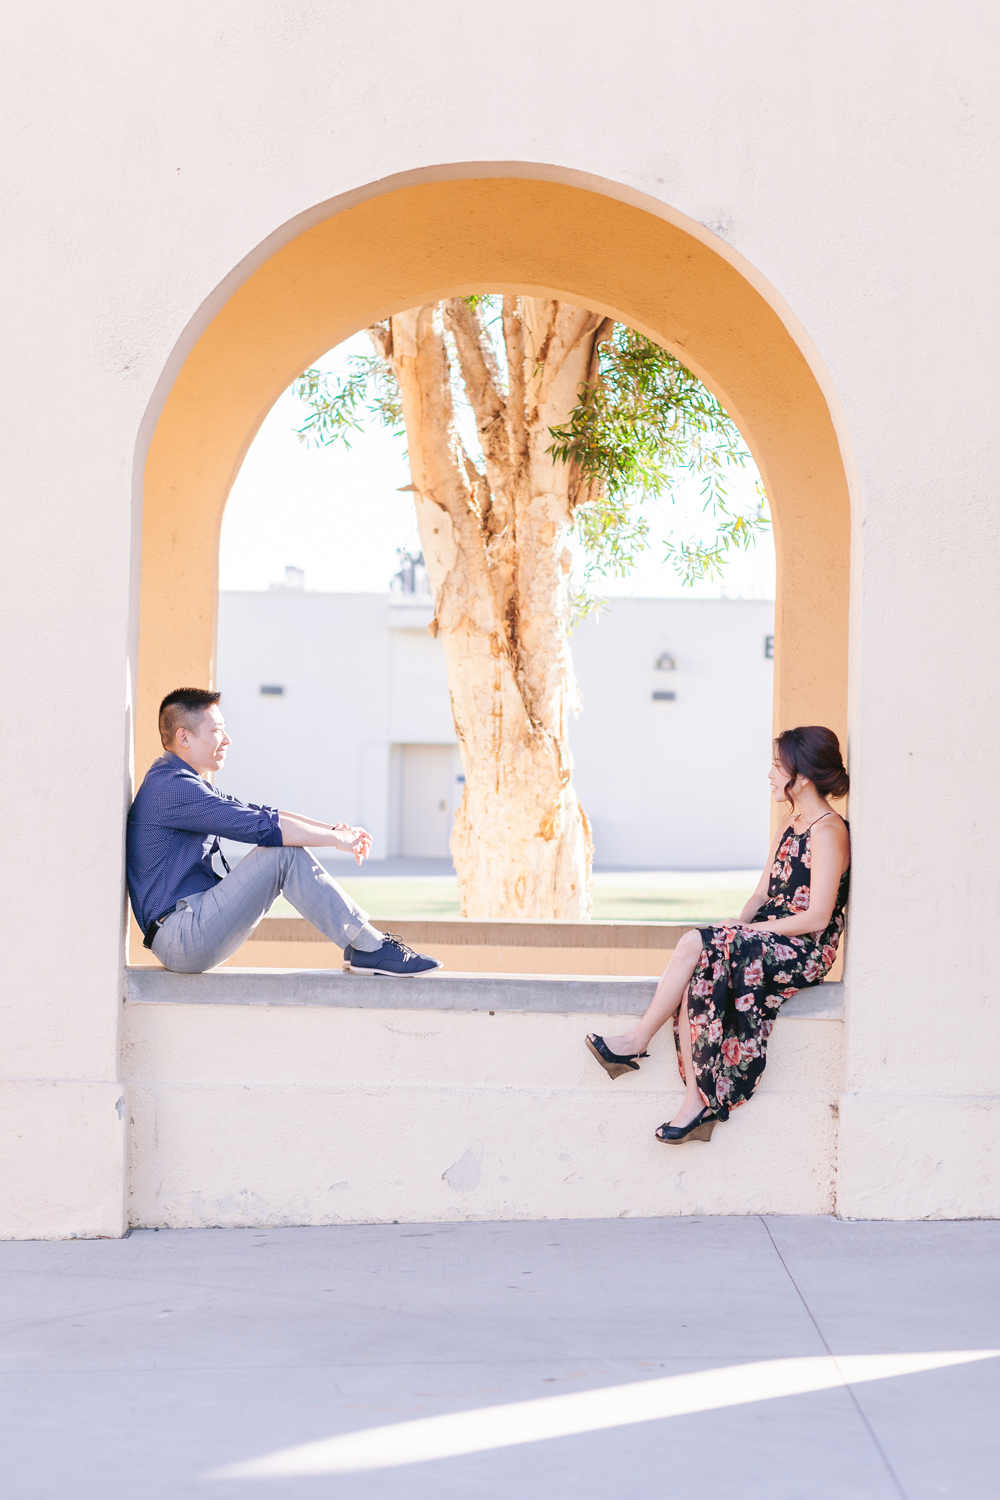 Classroom Themed Engagement Session